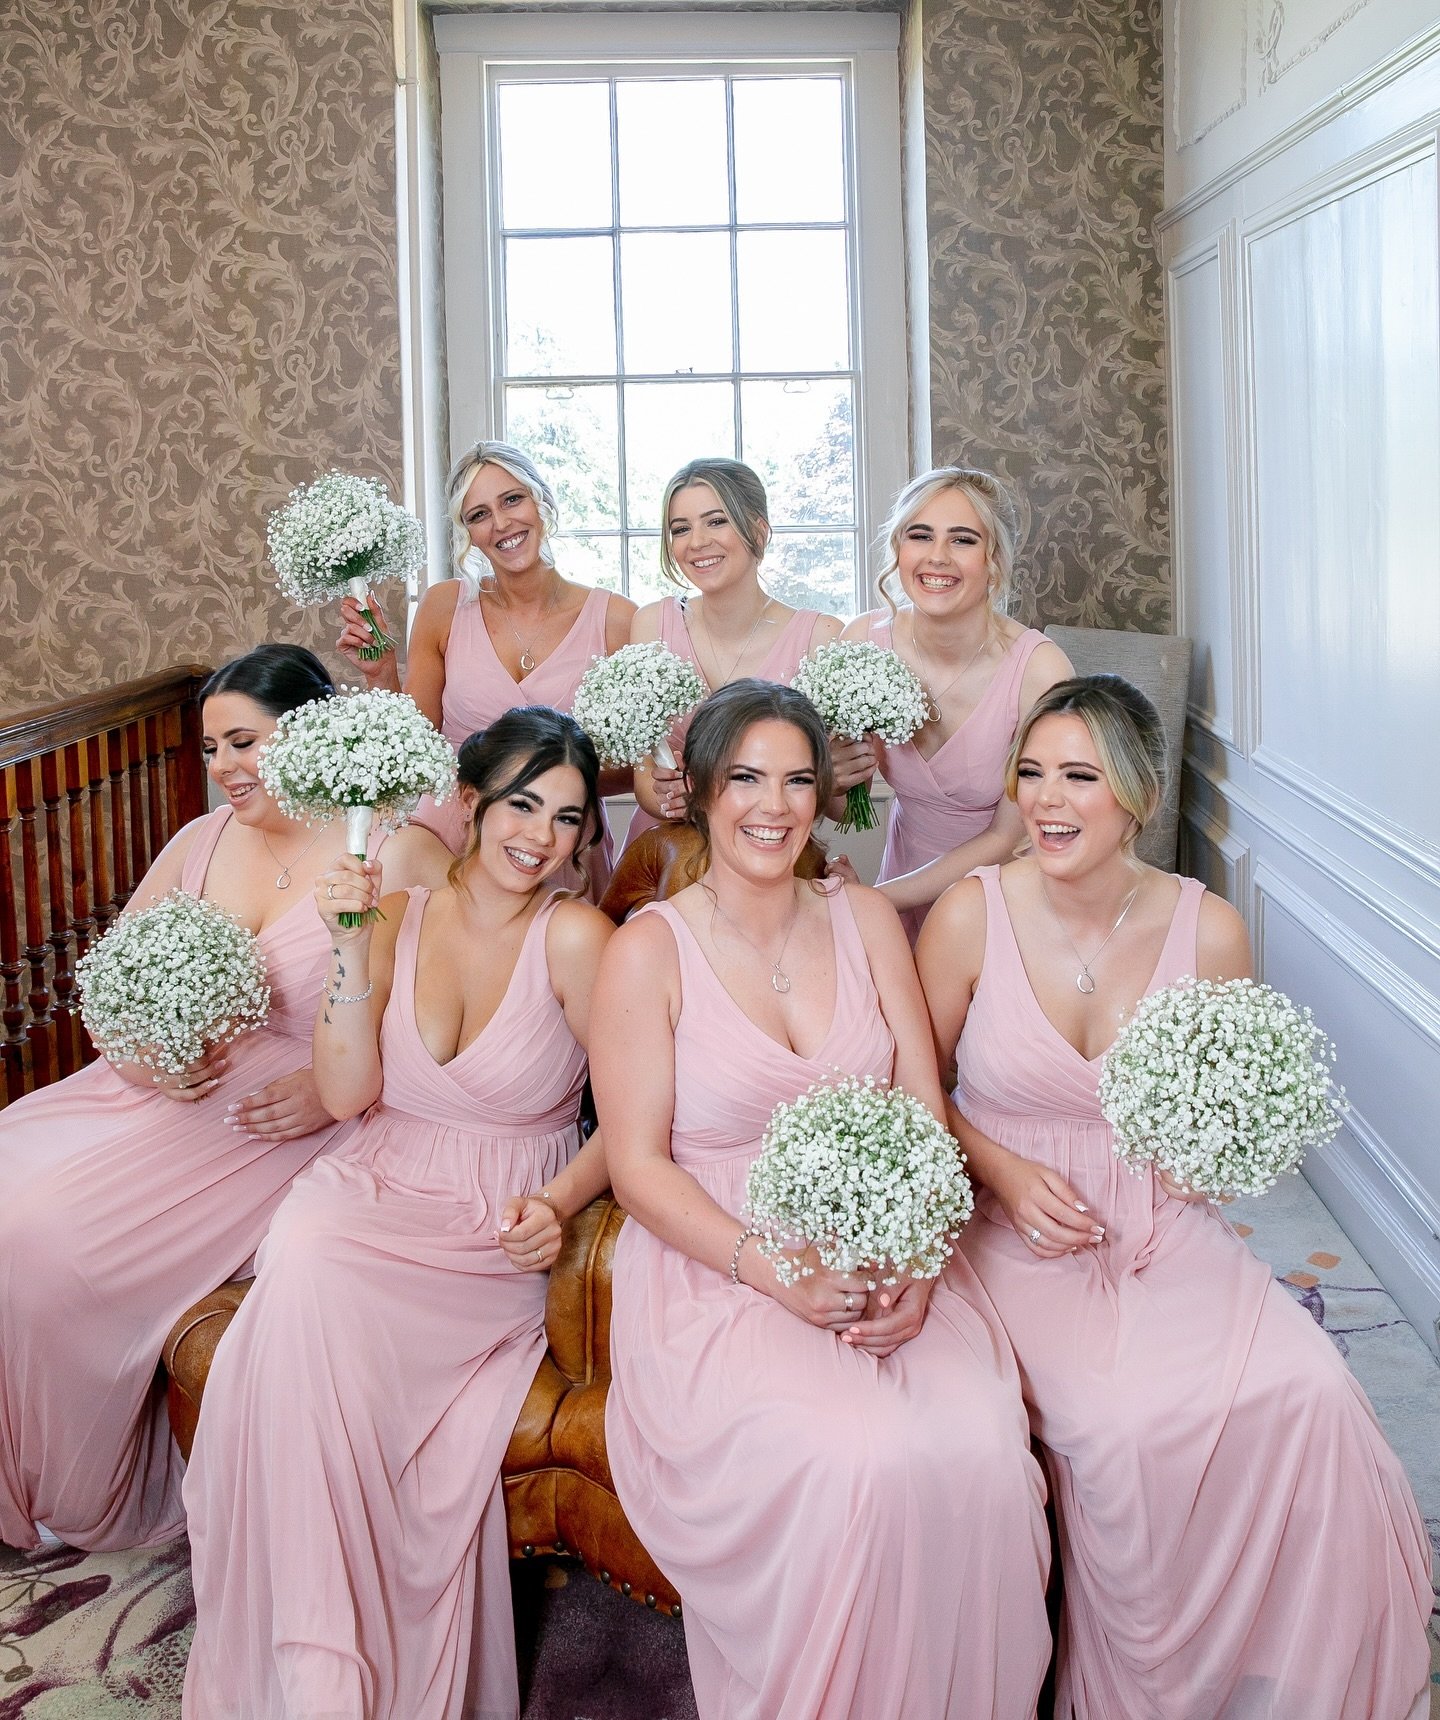 Bridesmaids ready 💗🌸. Capturing the fun and laughter as we eagerly wait the brides entrance ⛪️ #lisapaynephotography #bridesmaids #waitingforthebride #stokeplacehotel